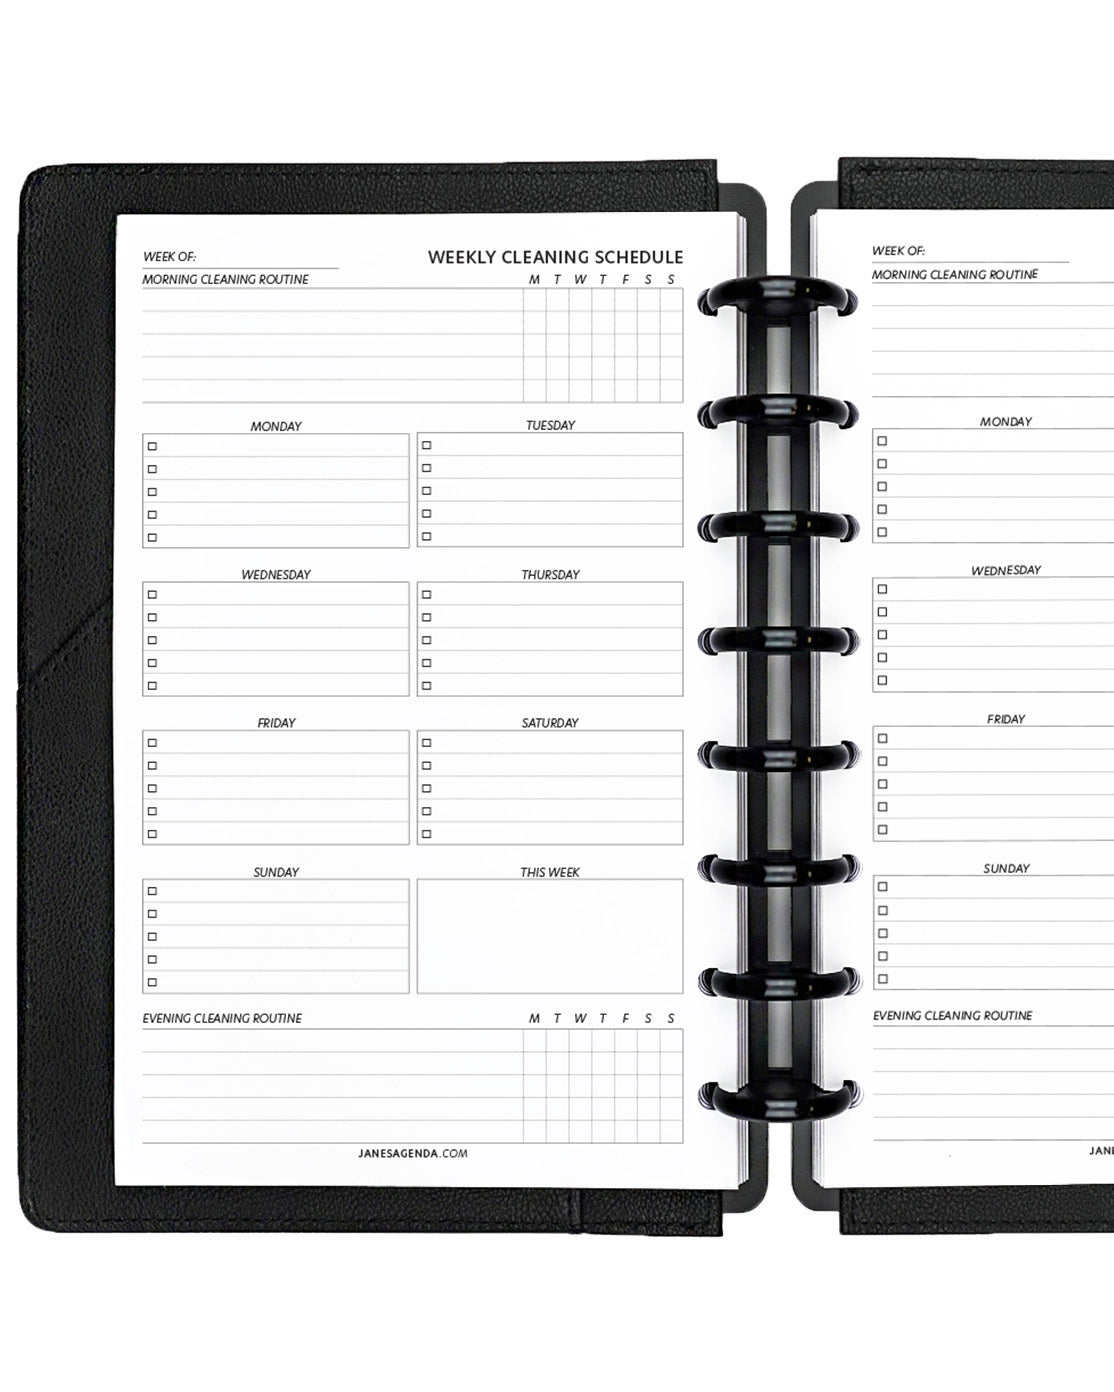 Weekly cleaning routine planner insert refill pages for discbound planners, disc notebooks, and A5 planner binders by Jane's Agenda.